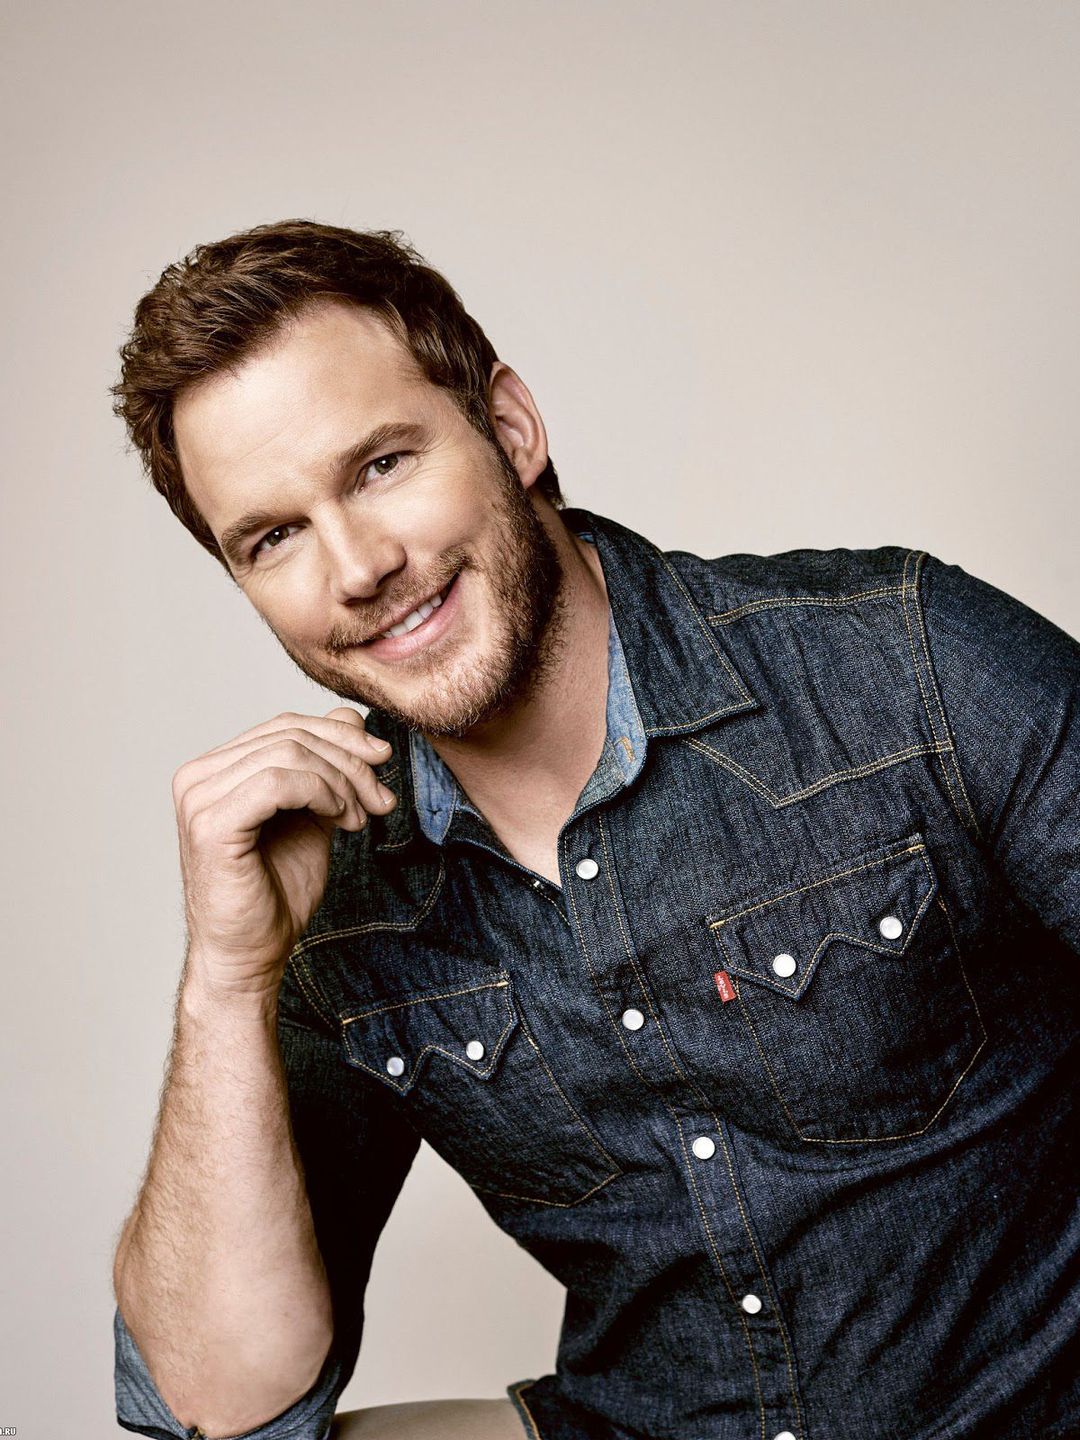 Chris Pratt who is his father